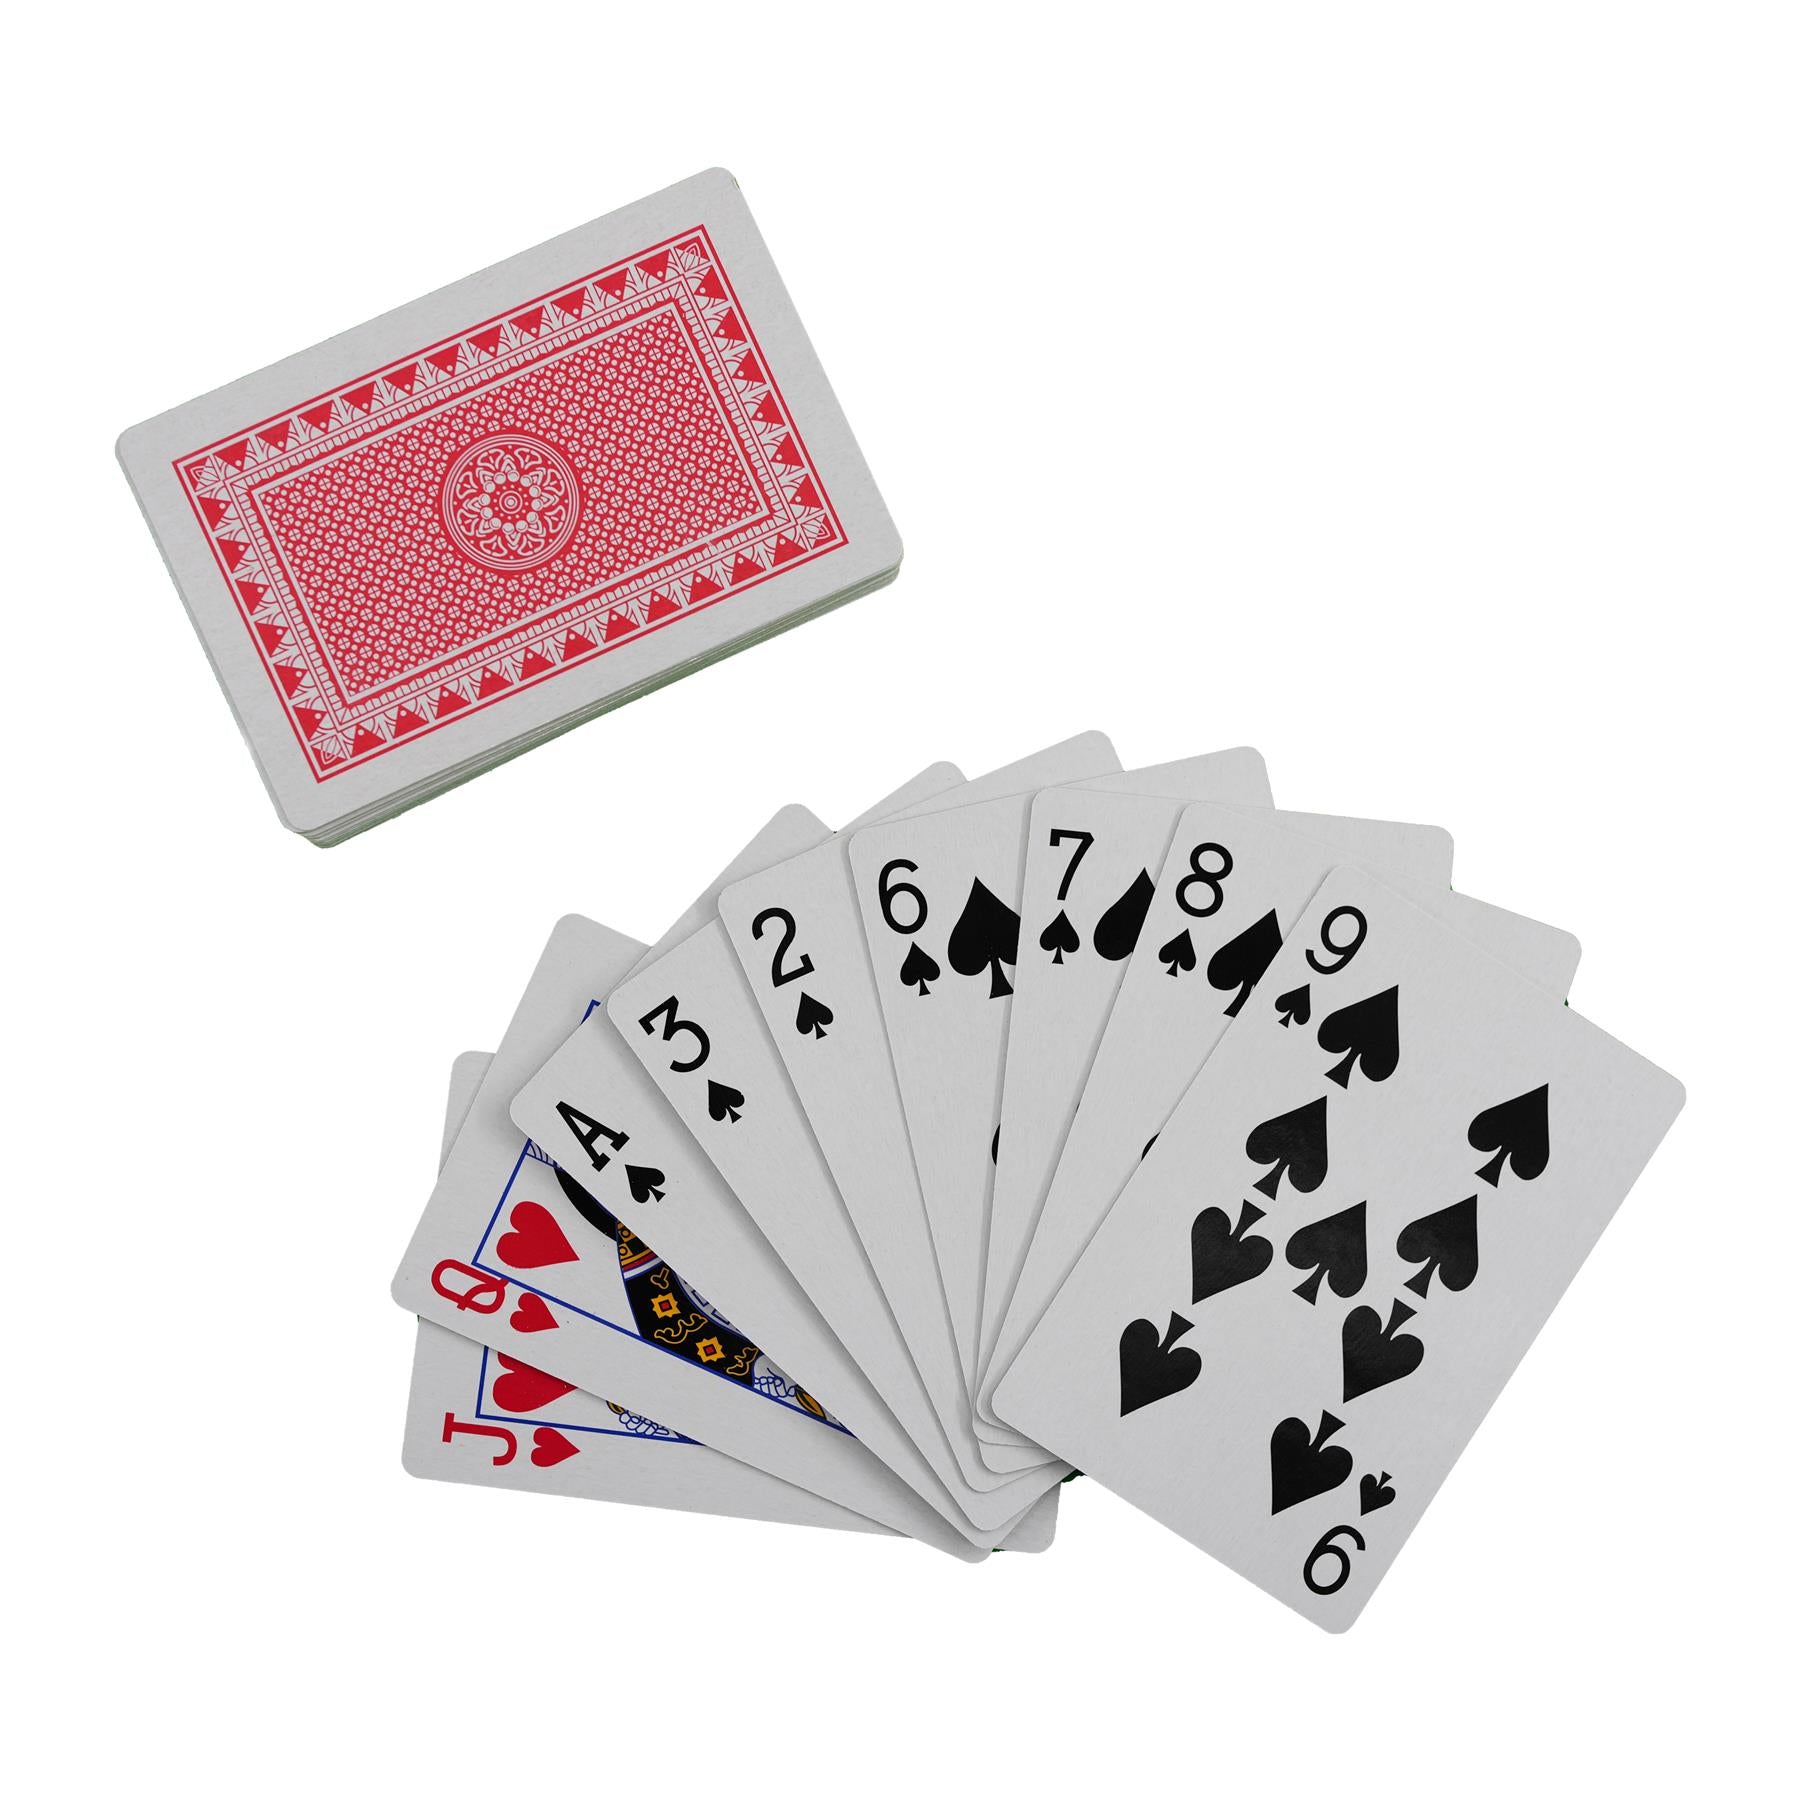 Deck of Classic Playing Cards by The Magic Toy Shop - The Magic Toy Shop